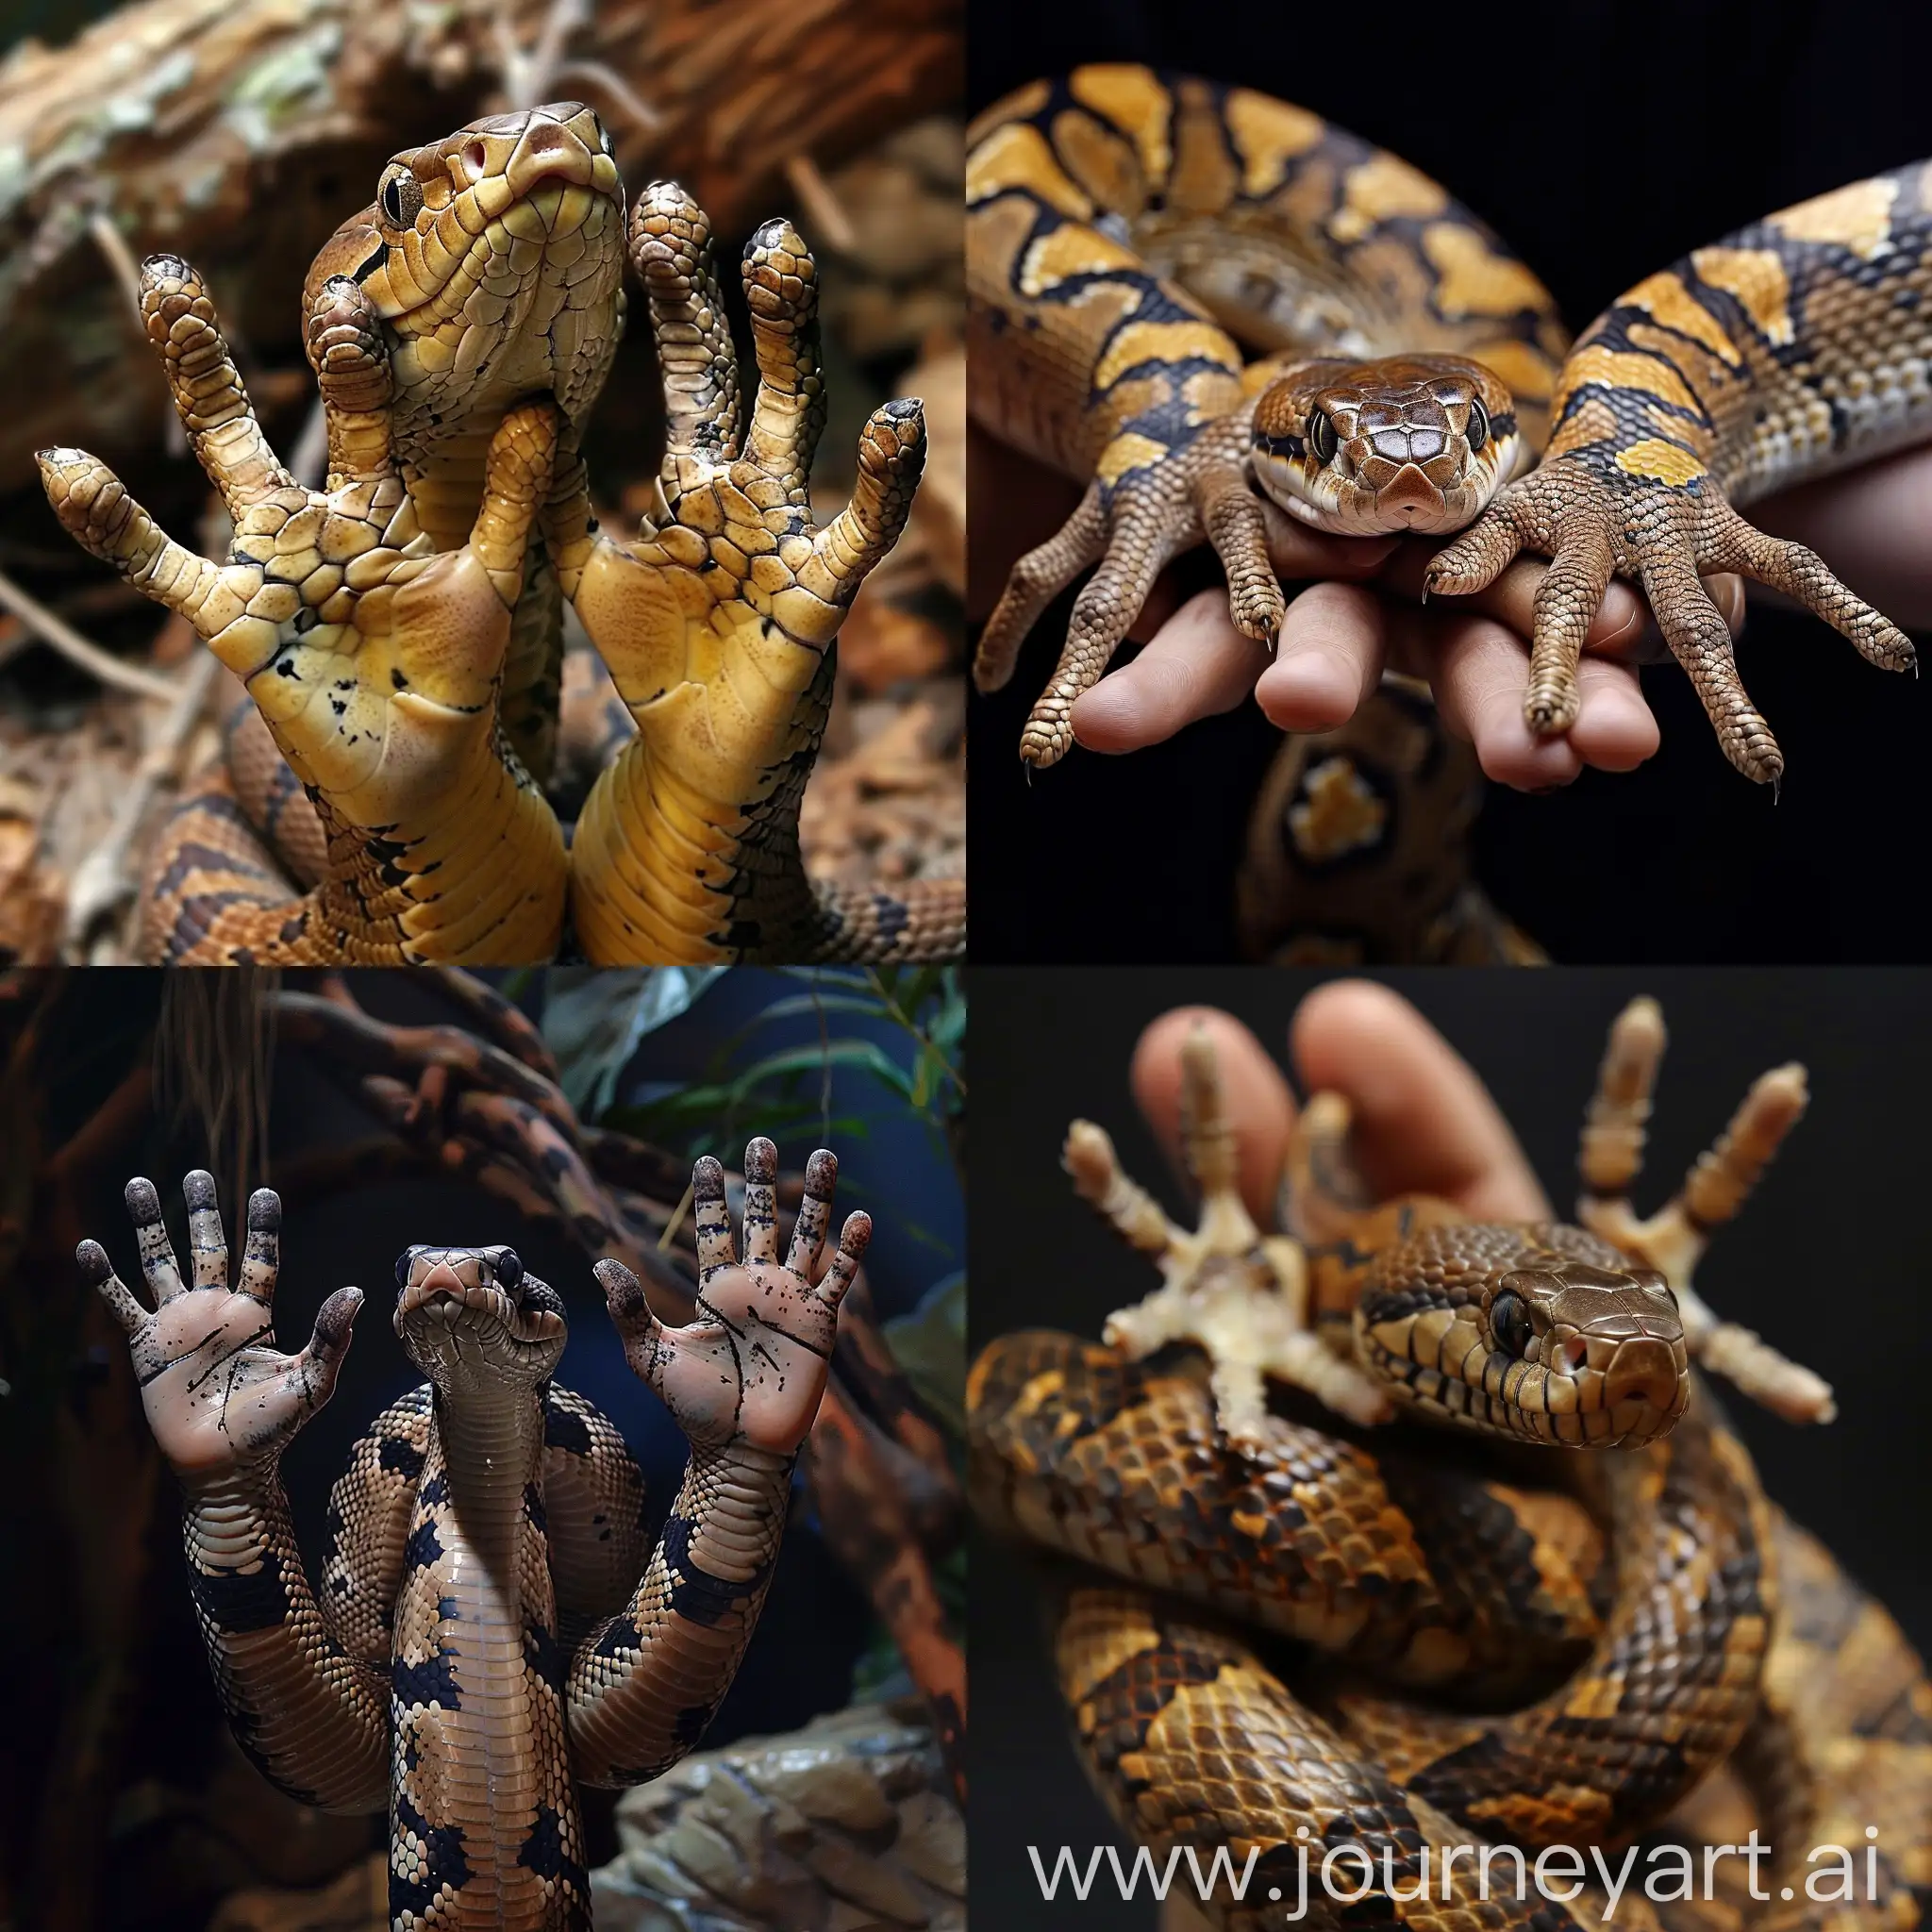 A snake with 5 hands